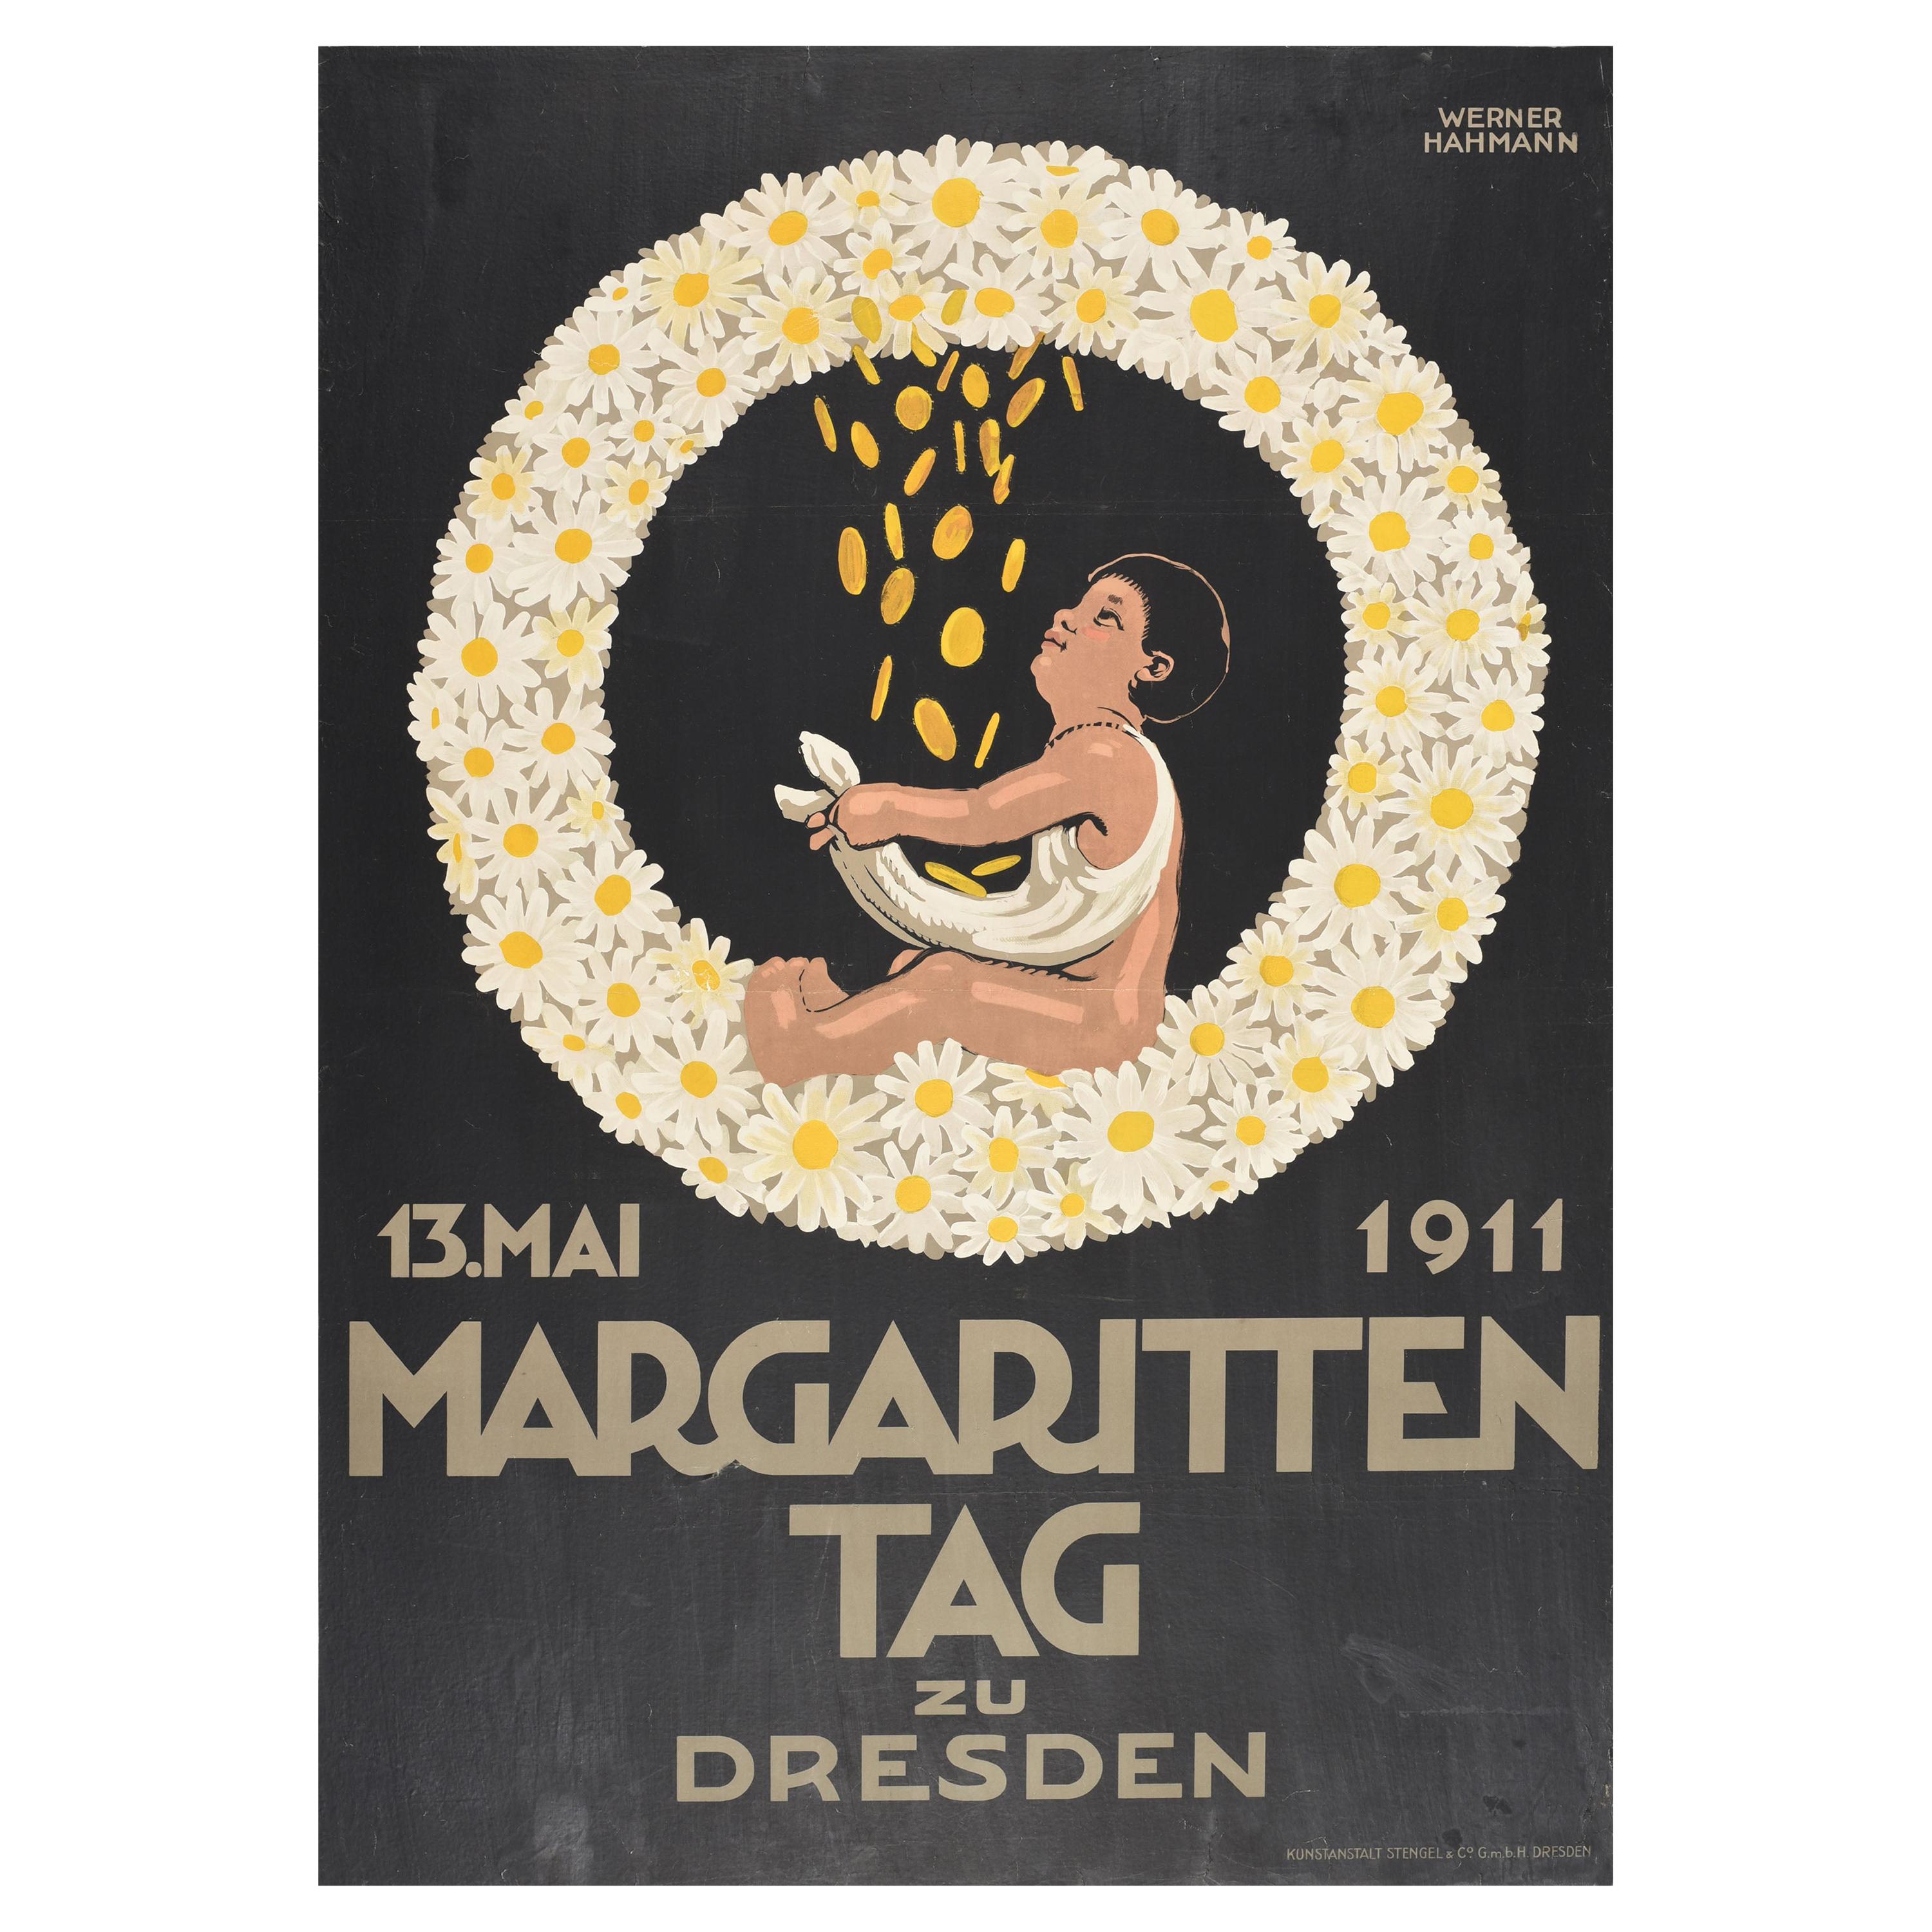 Original Antique Poster Margaritten Tag Dresden Daisy Flowers Child Charity Day